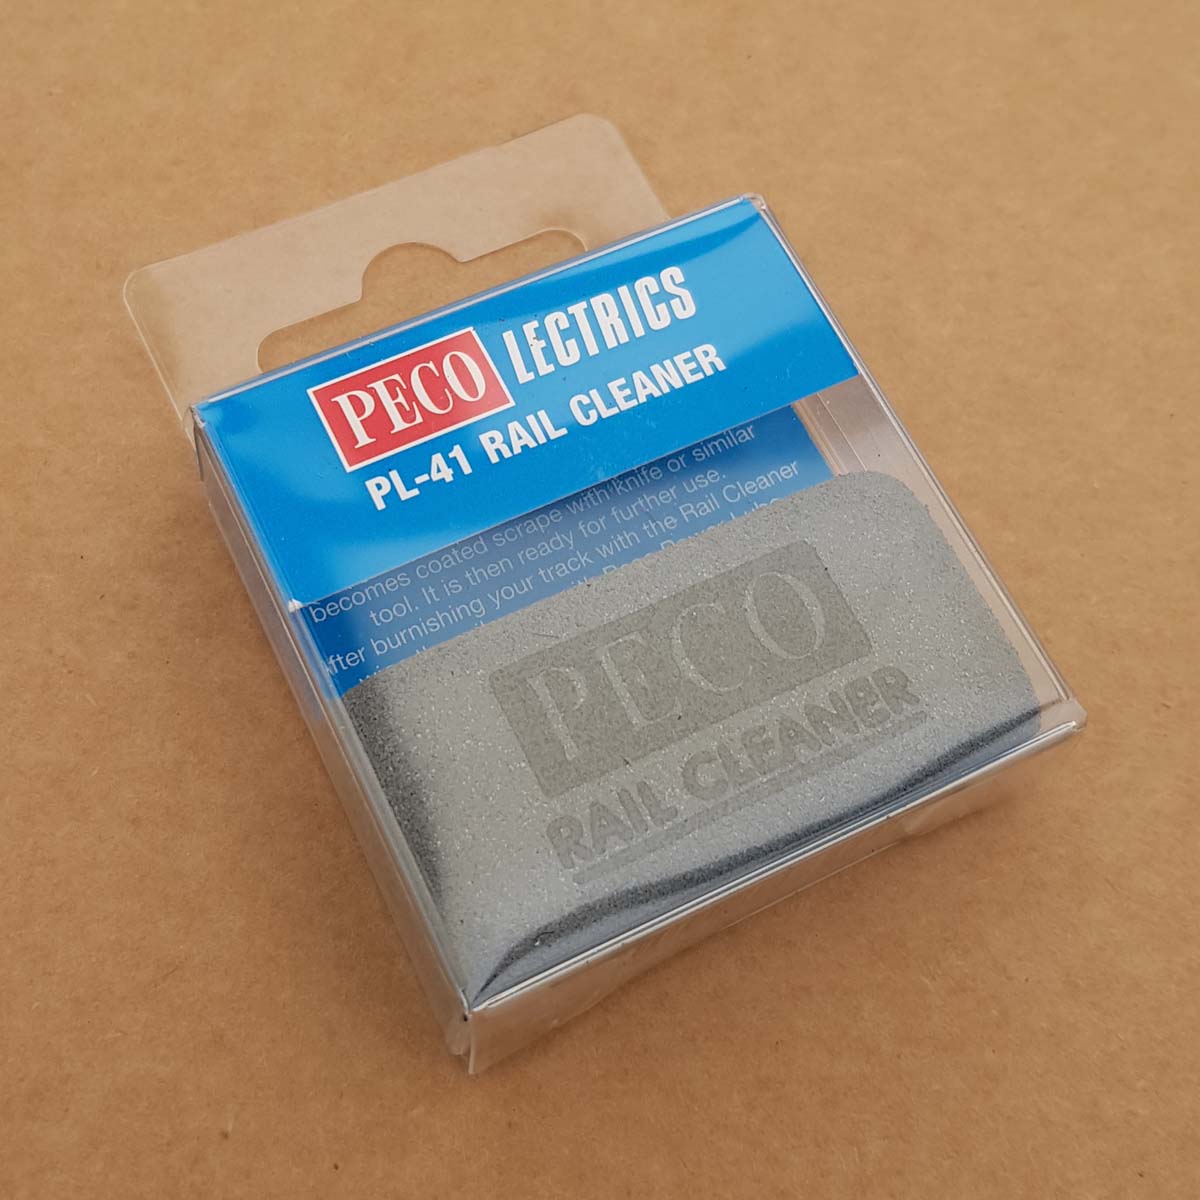 PECO PL-41 Rail Cleaner Rubber for Scalextric Track or Hornby Rail Track NEW - Action Slot Racing